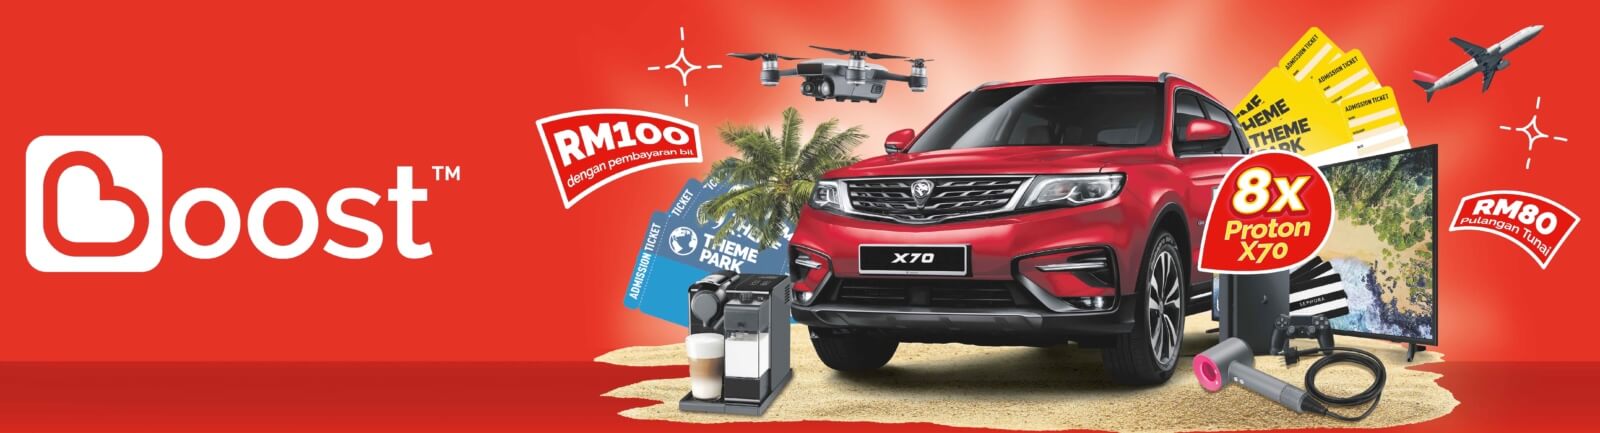 [TEST] From Now Until 18 Aug, Pay With Boost to Win 8 Proton X70 Cars & Other Prizes Worth Up to RM2.5 Mil! - WORLD OF BUZZ